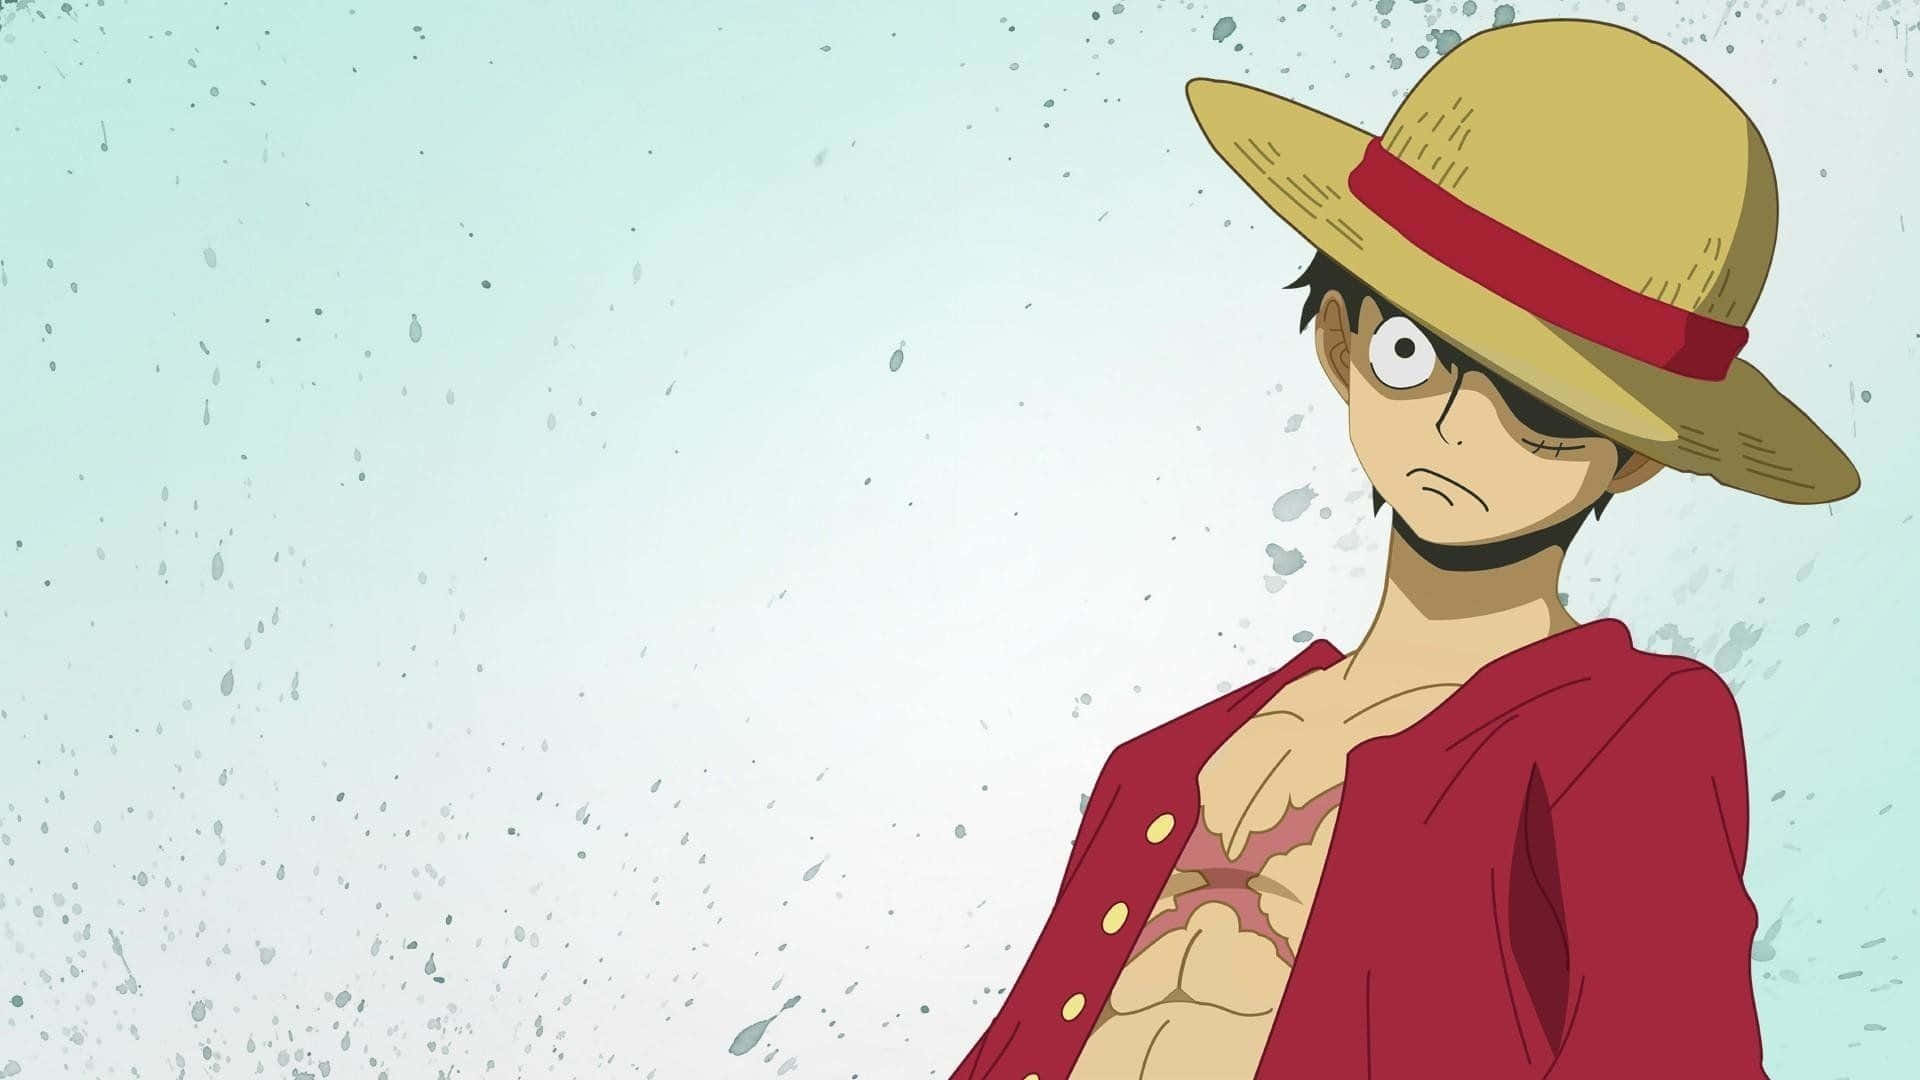 "Luffy defies the odds as he embarks on his journey to become the next Pirate King."